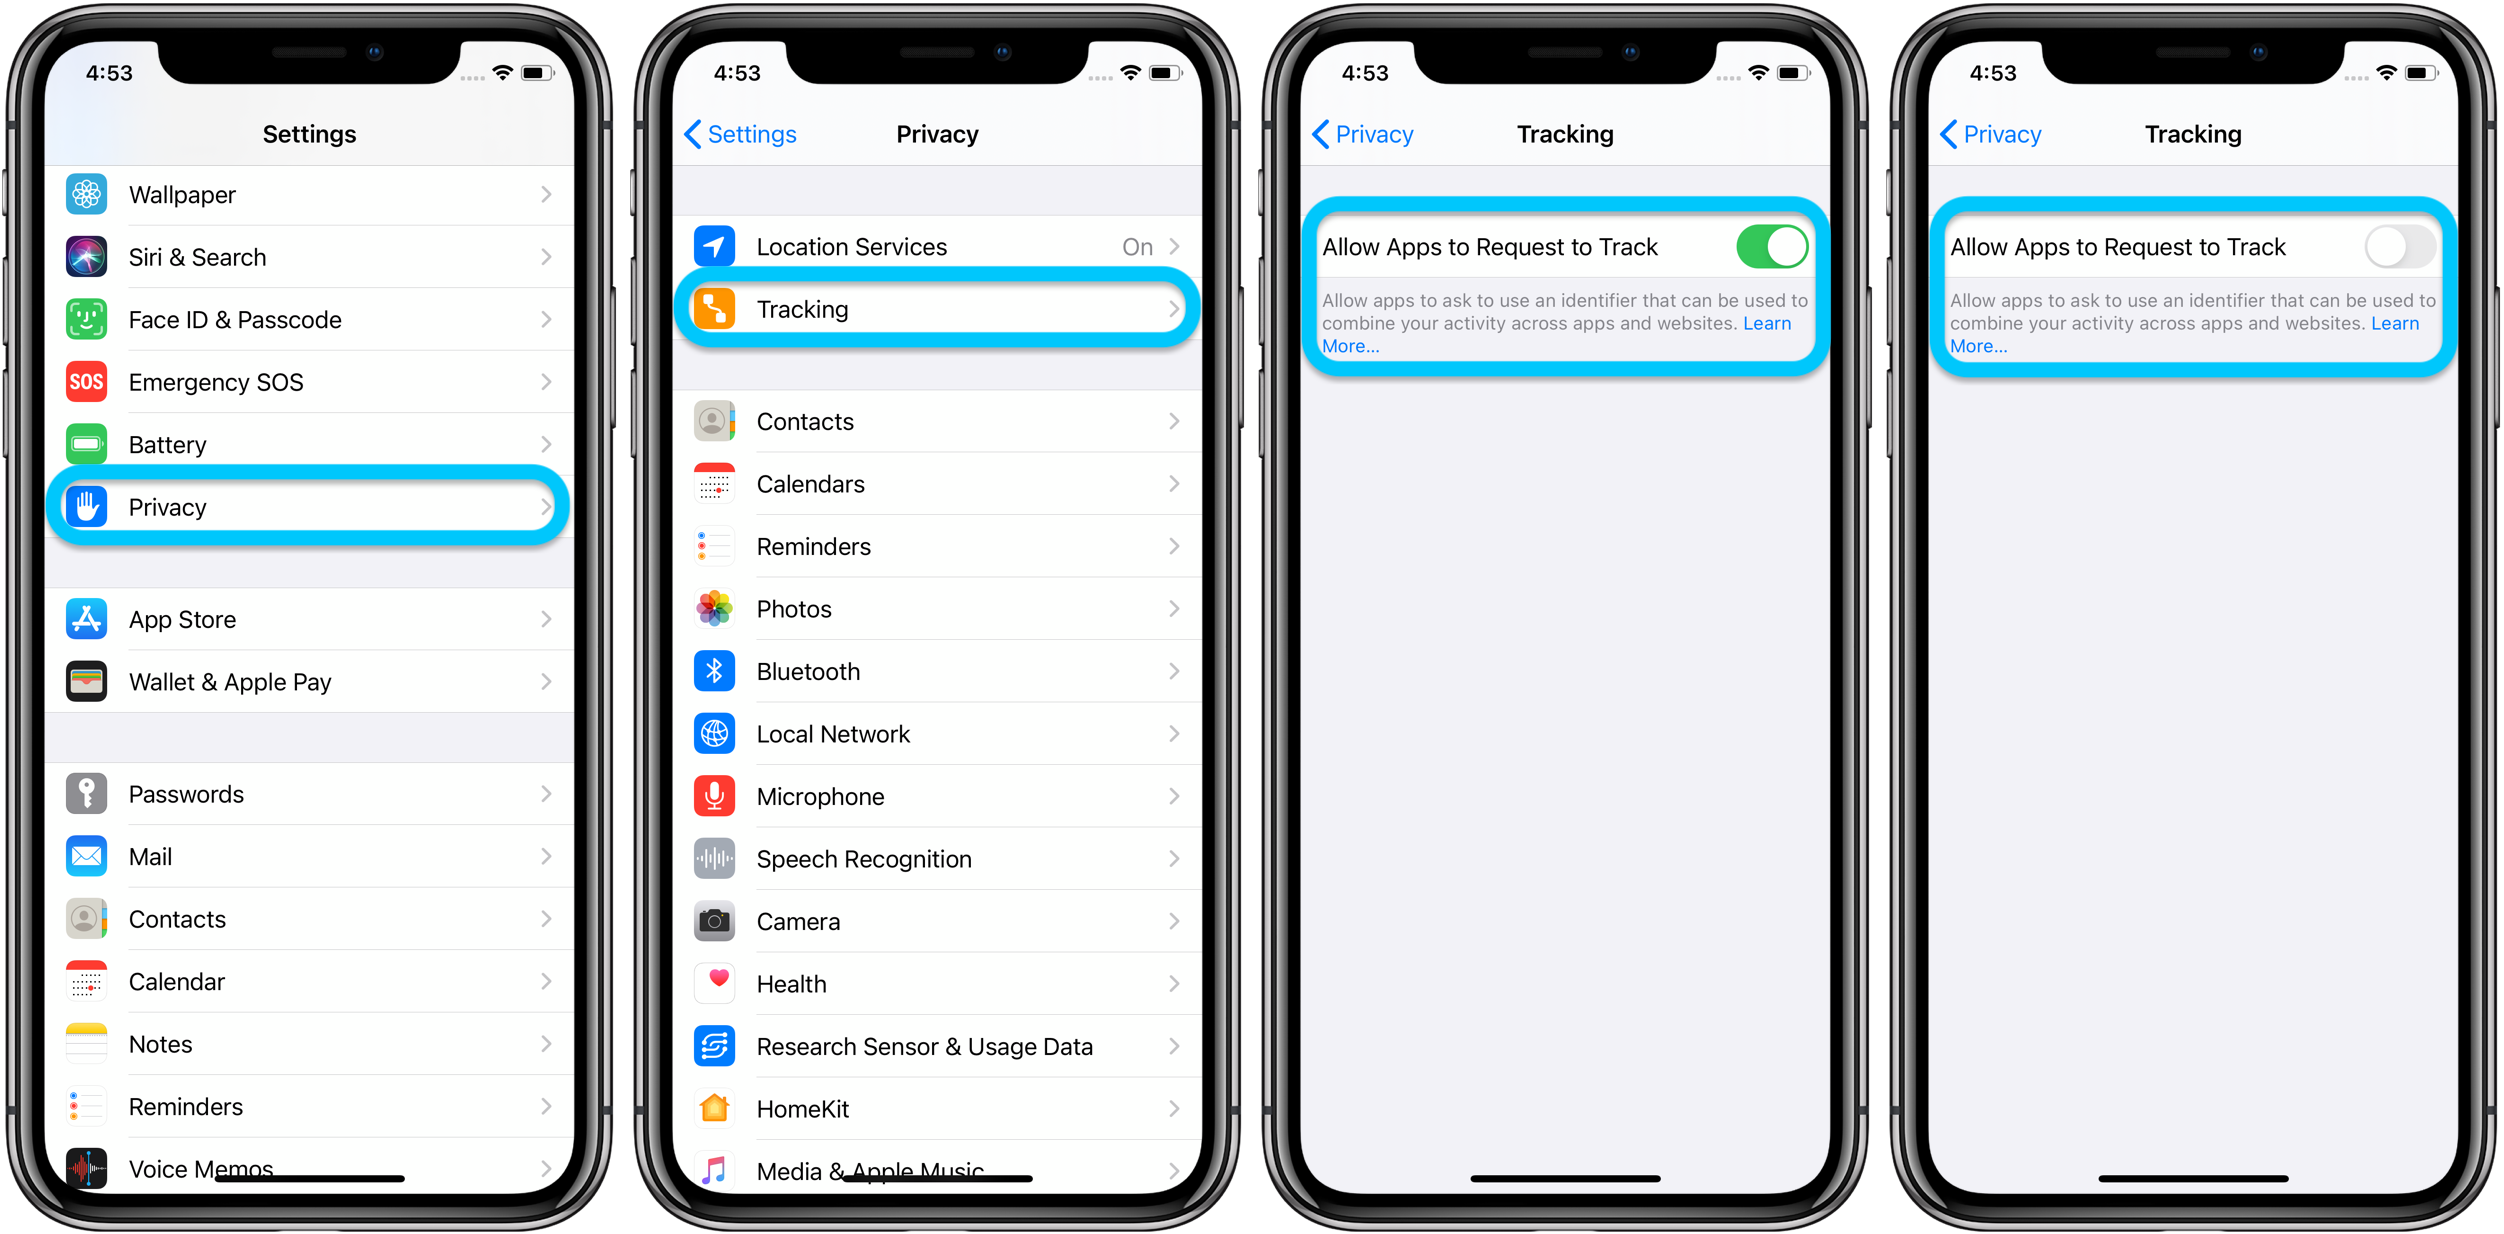 How To Block Iphone App Tracking In Ios 14 9to5mac 4398